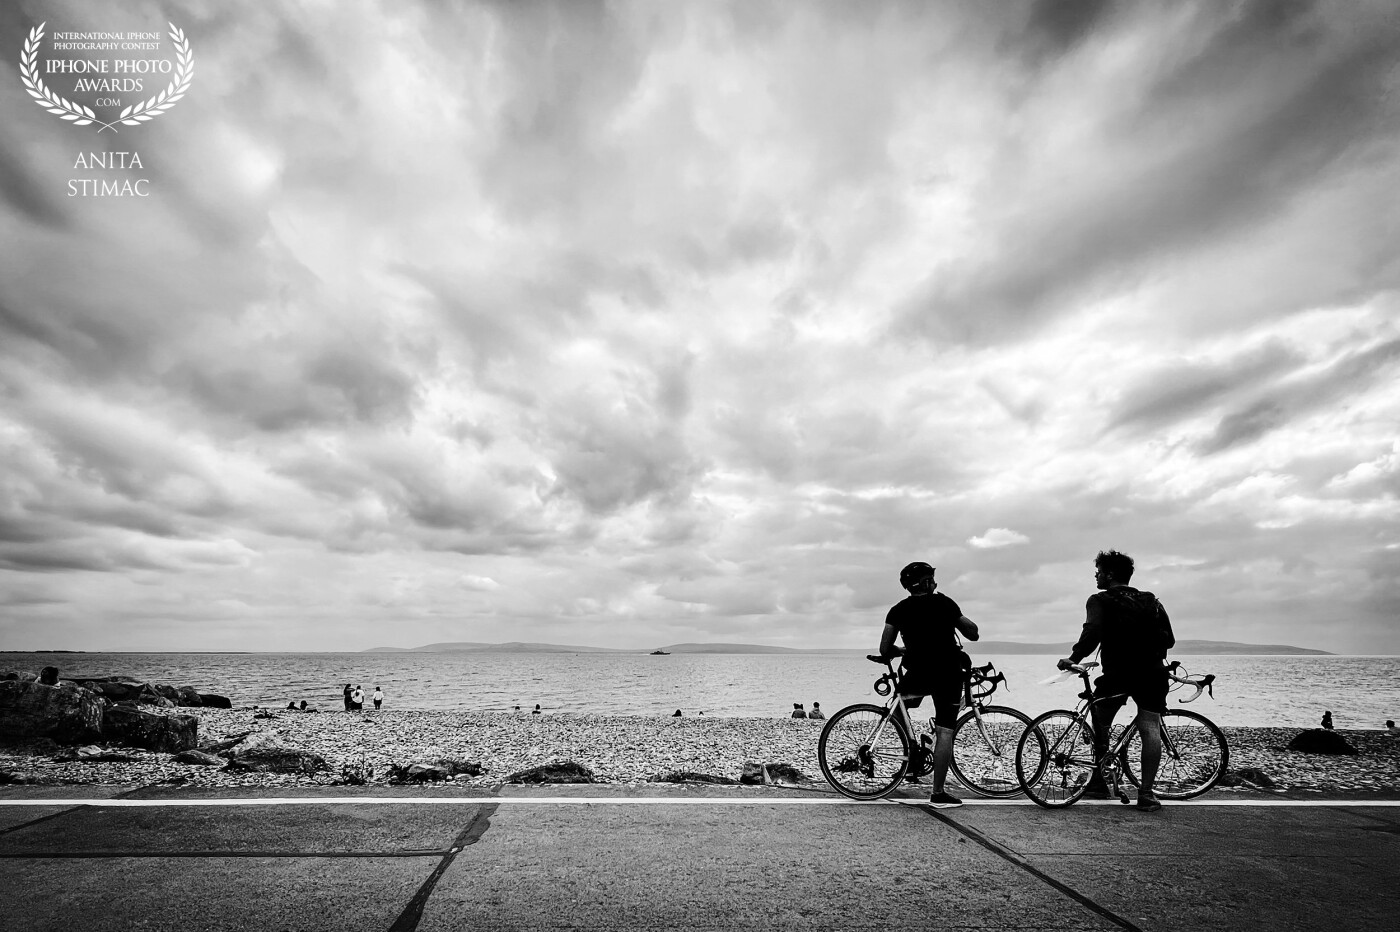 “Whatever the clouds plan to do, I always trust in the sun which never fails to come out.”<br />
<br />
Salthill Promenade in Galway, West Coast of Ireland.  The Road by the sea facing the immensity of the Atlantic Ocean.